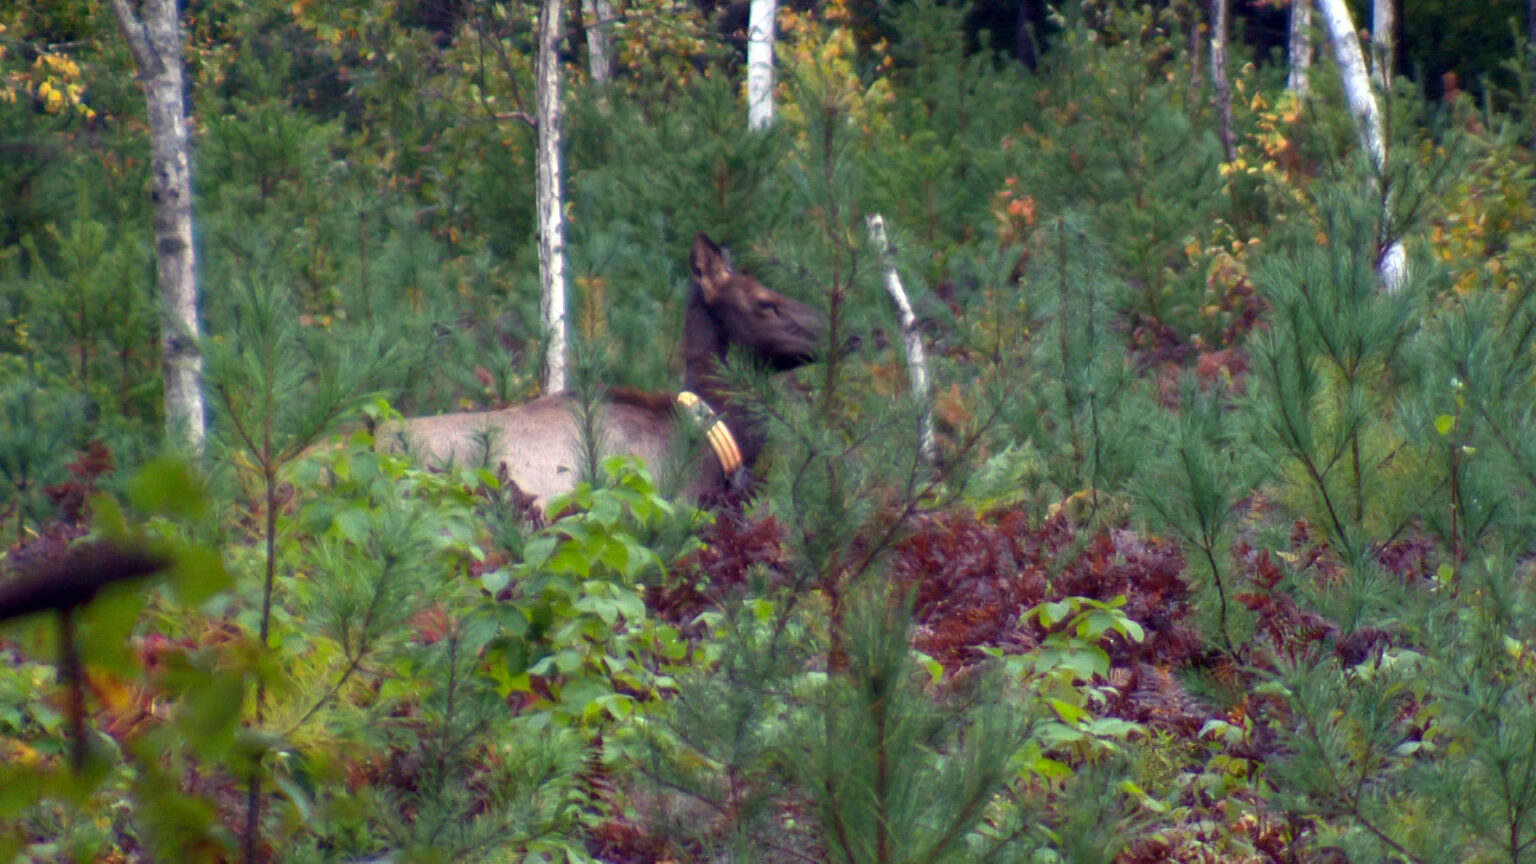 An elk wearing a tracking collar stands in undergrowth in woods with birch and pine trees.